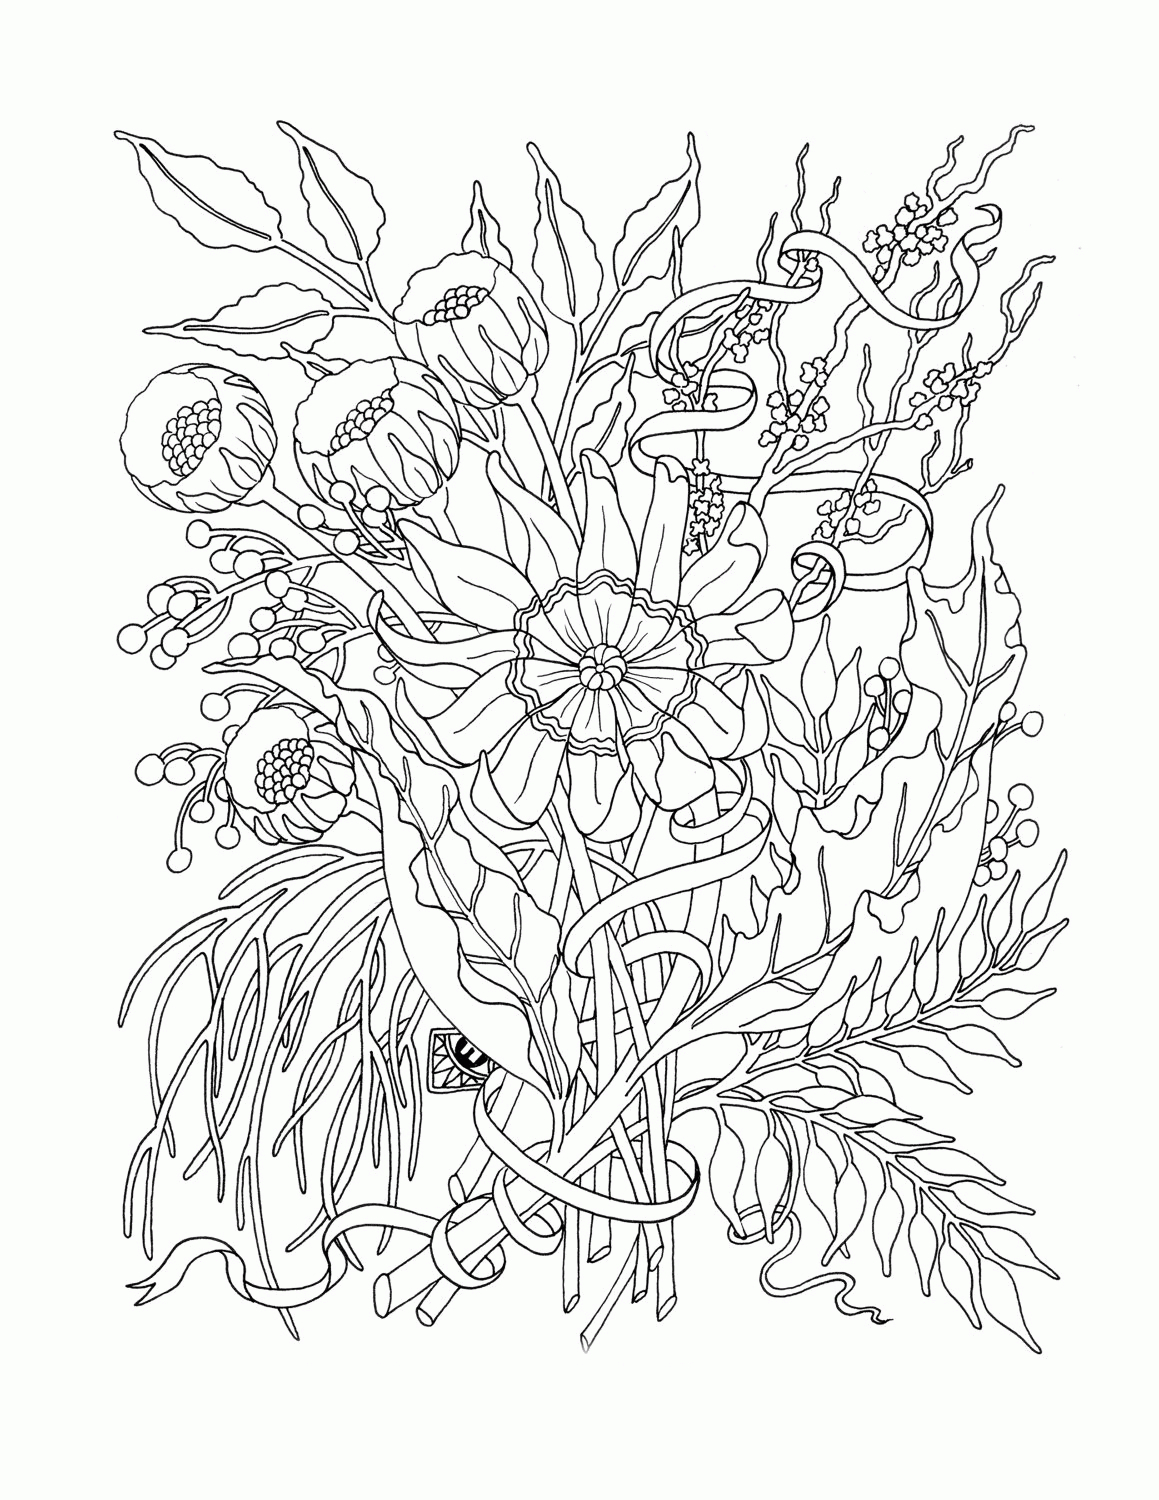 Adult Coloring Pages Flowers To Download And Print For Free - Free Printable Flower Coloring Pages For Adults